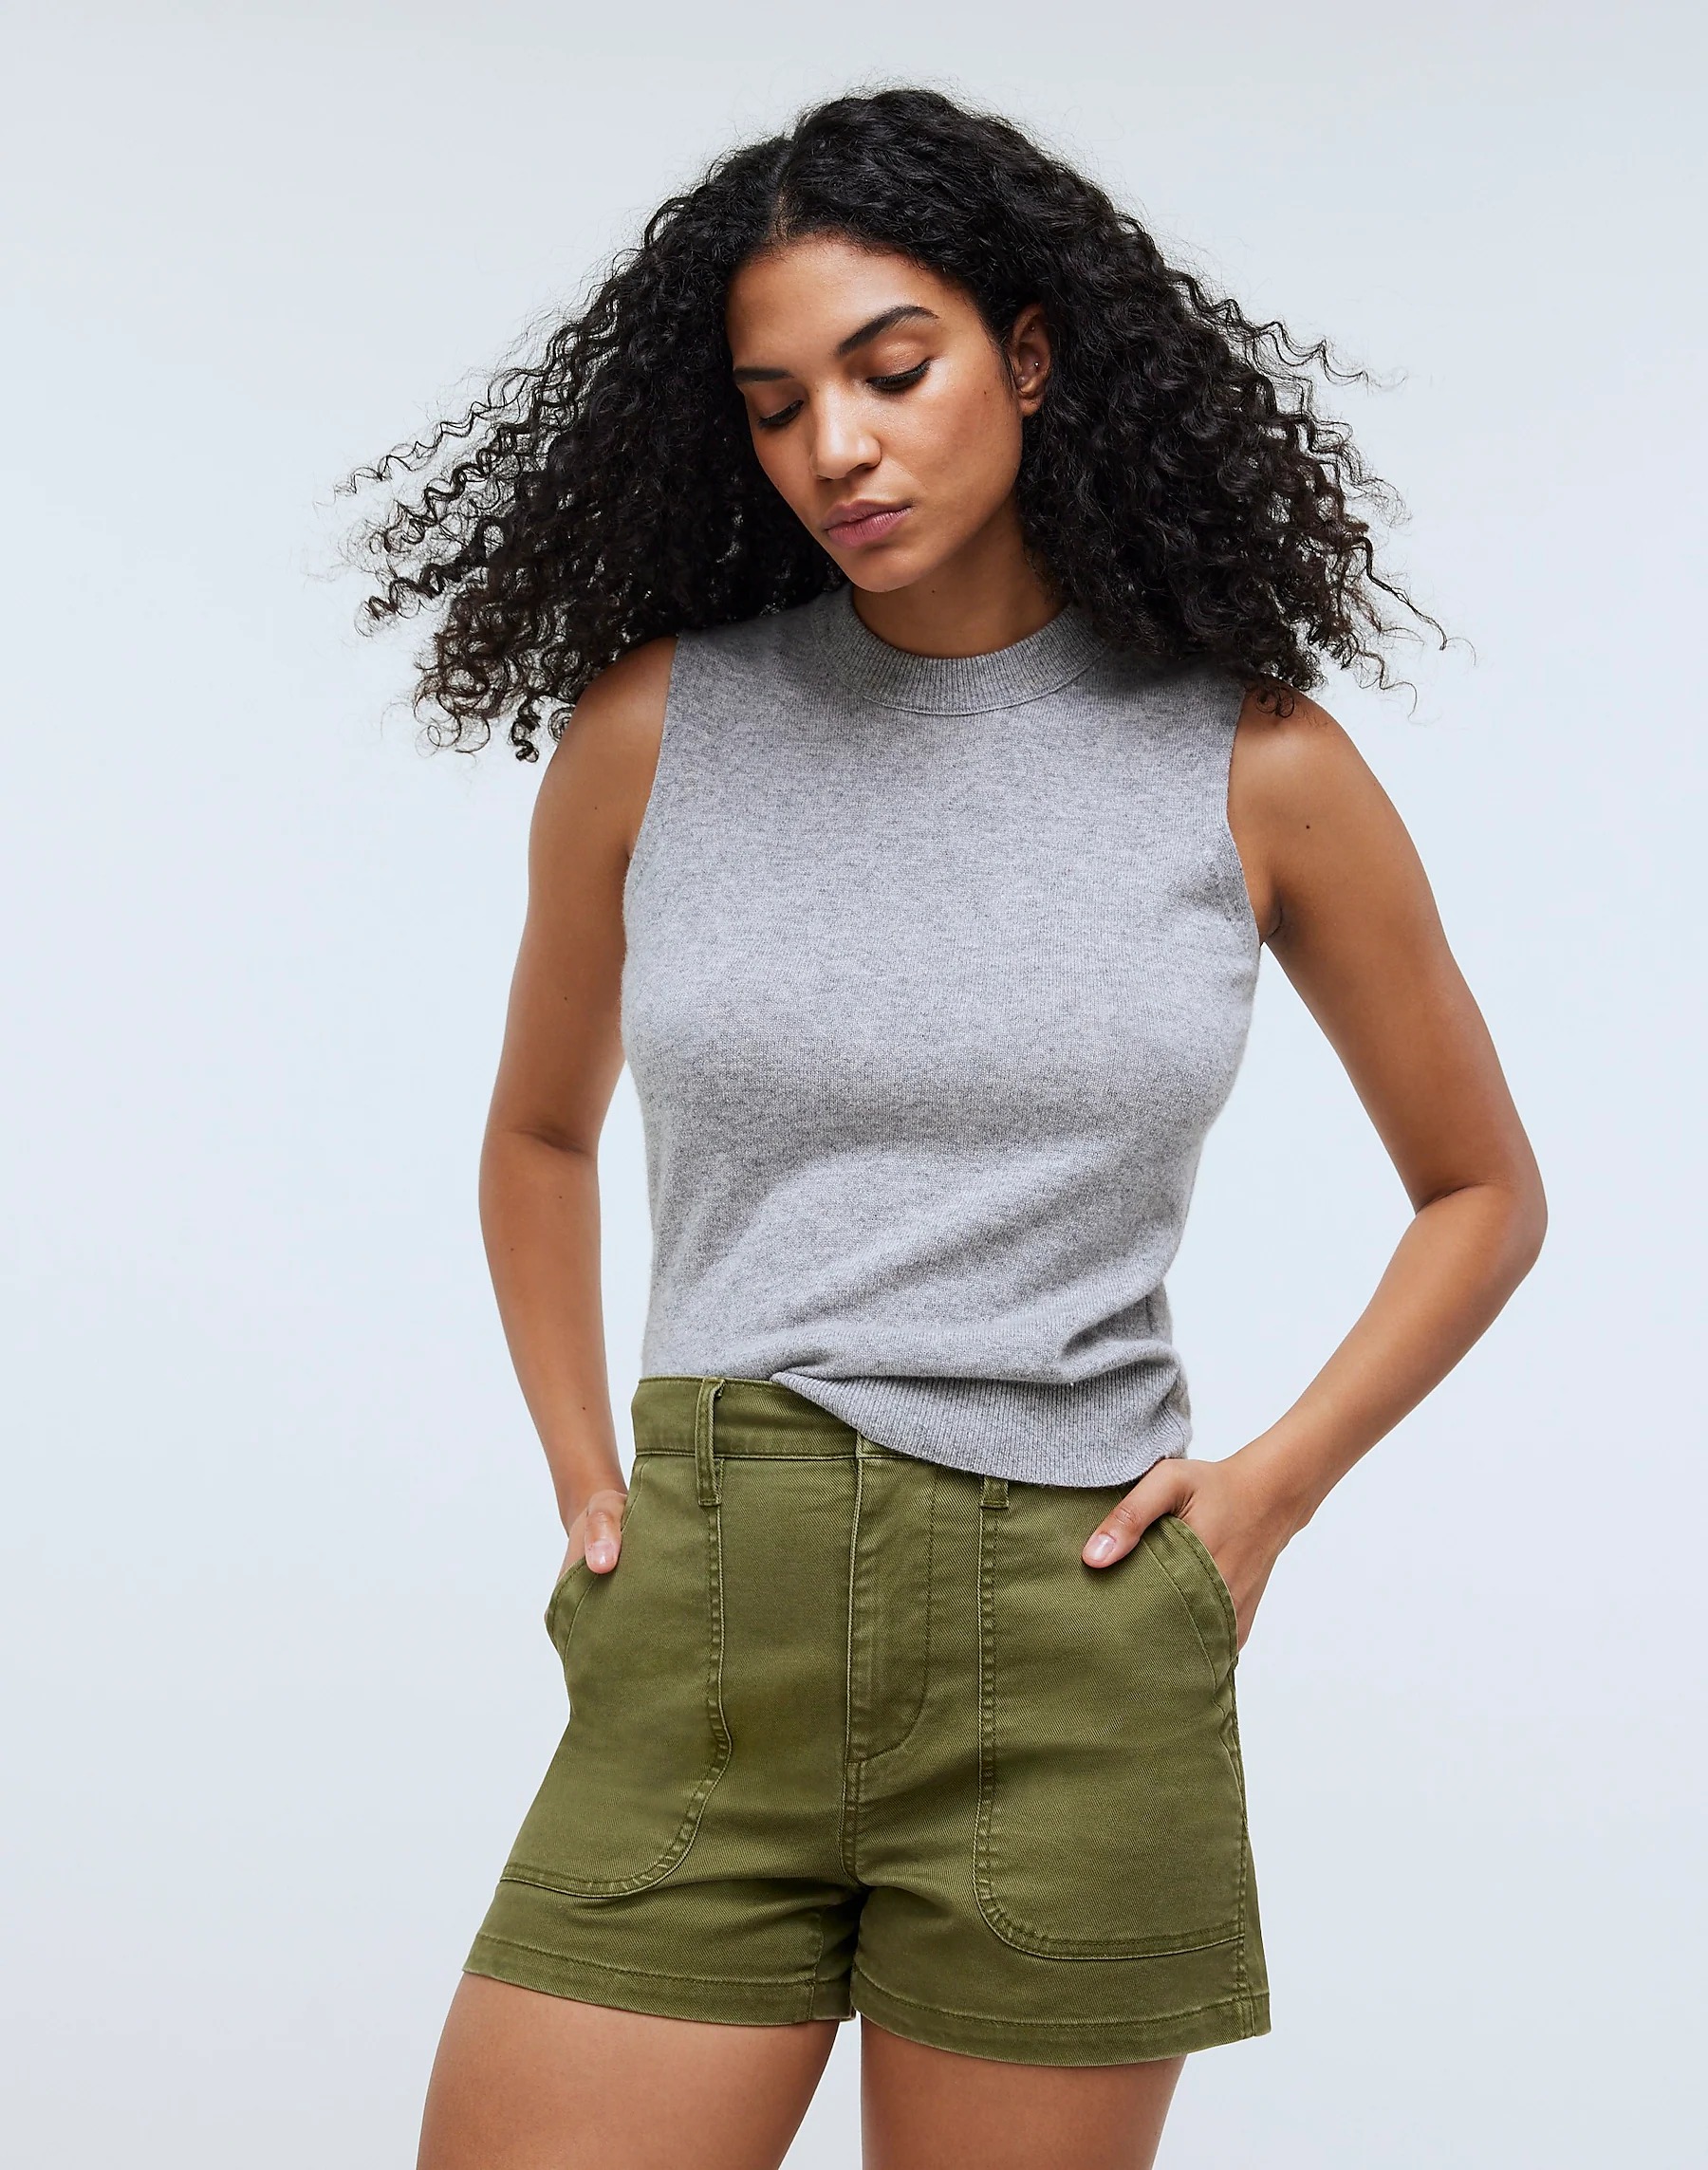 Madewell The Perfect Vintage Fatigue Short